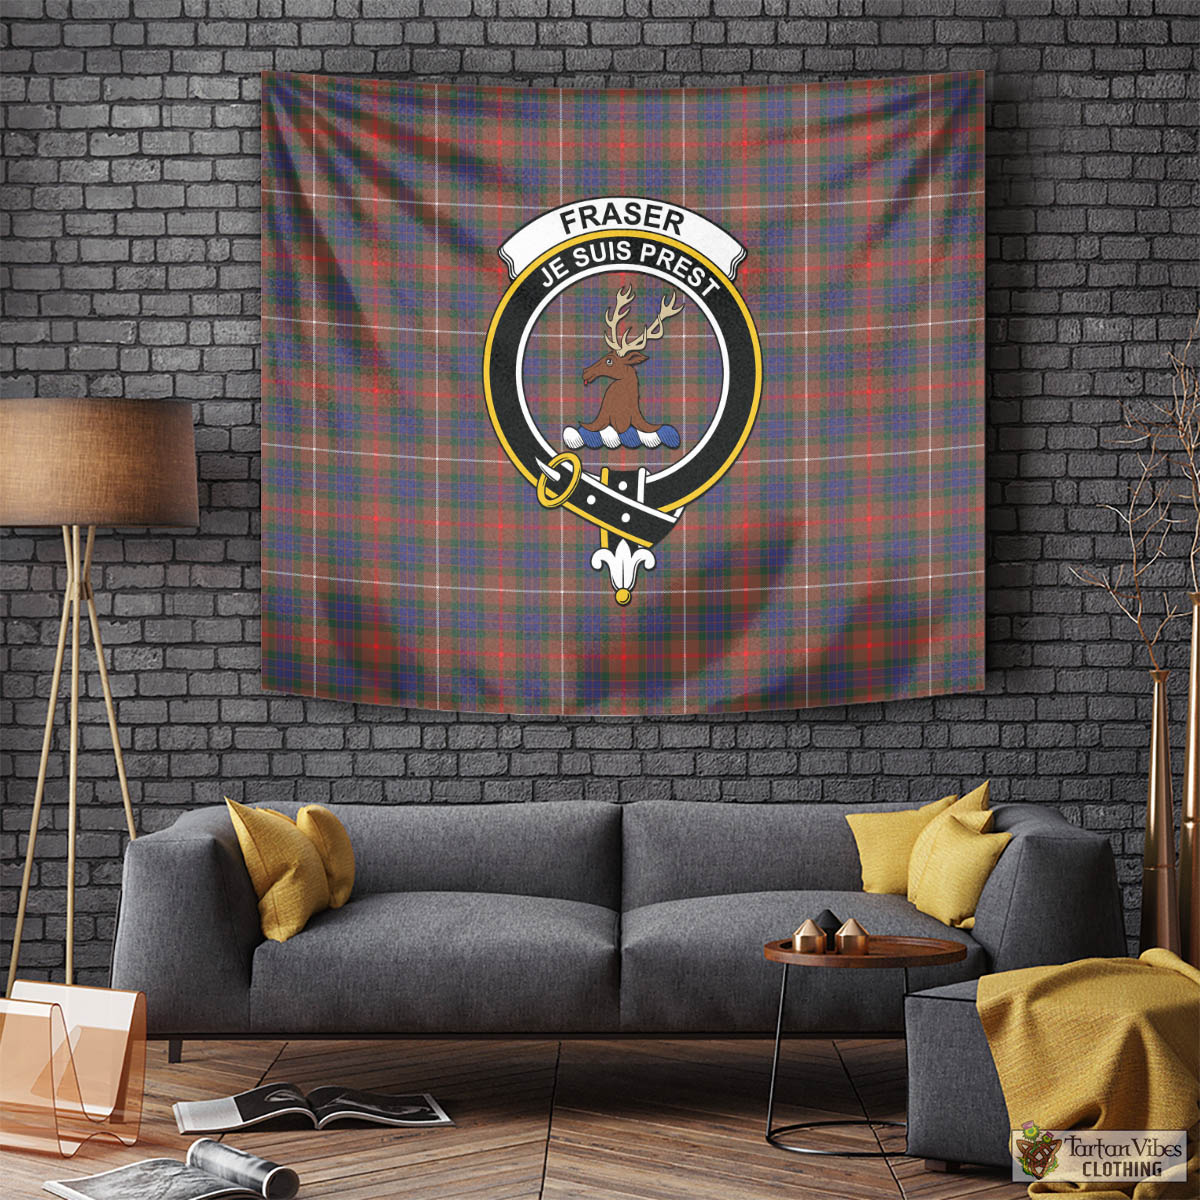 Tartan Vibes Clothing Fraser Hunting Modern Tartan Tapestry Wall Hanging and Home Decor for Room with Family Crest